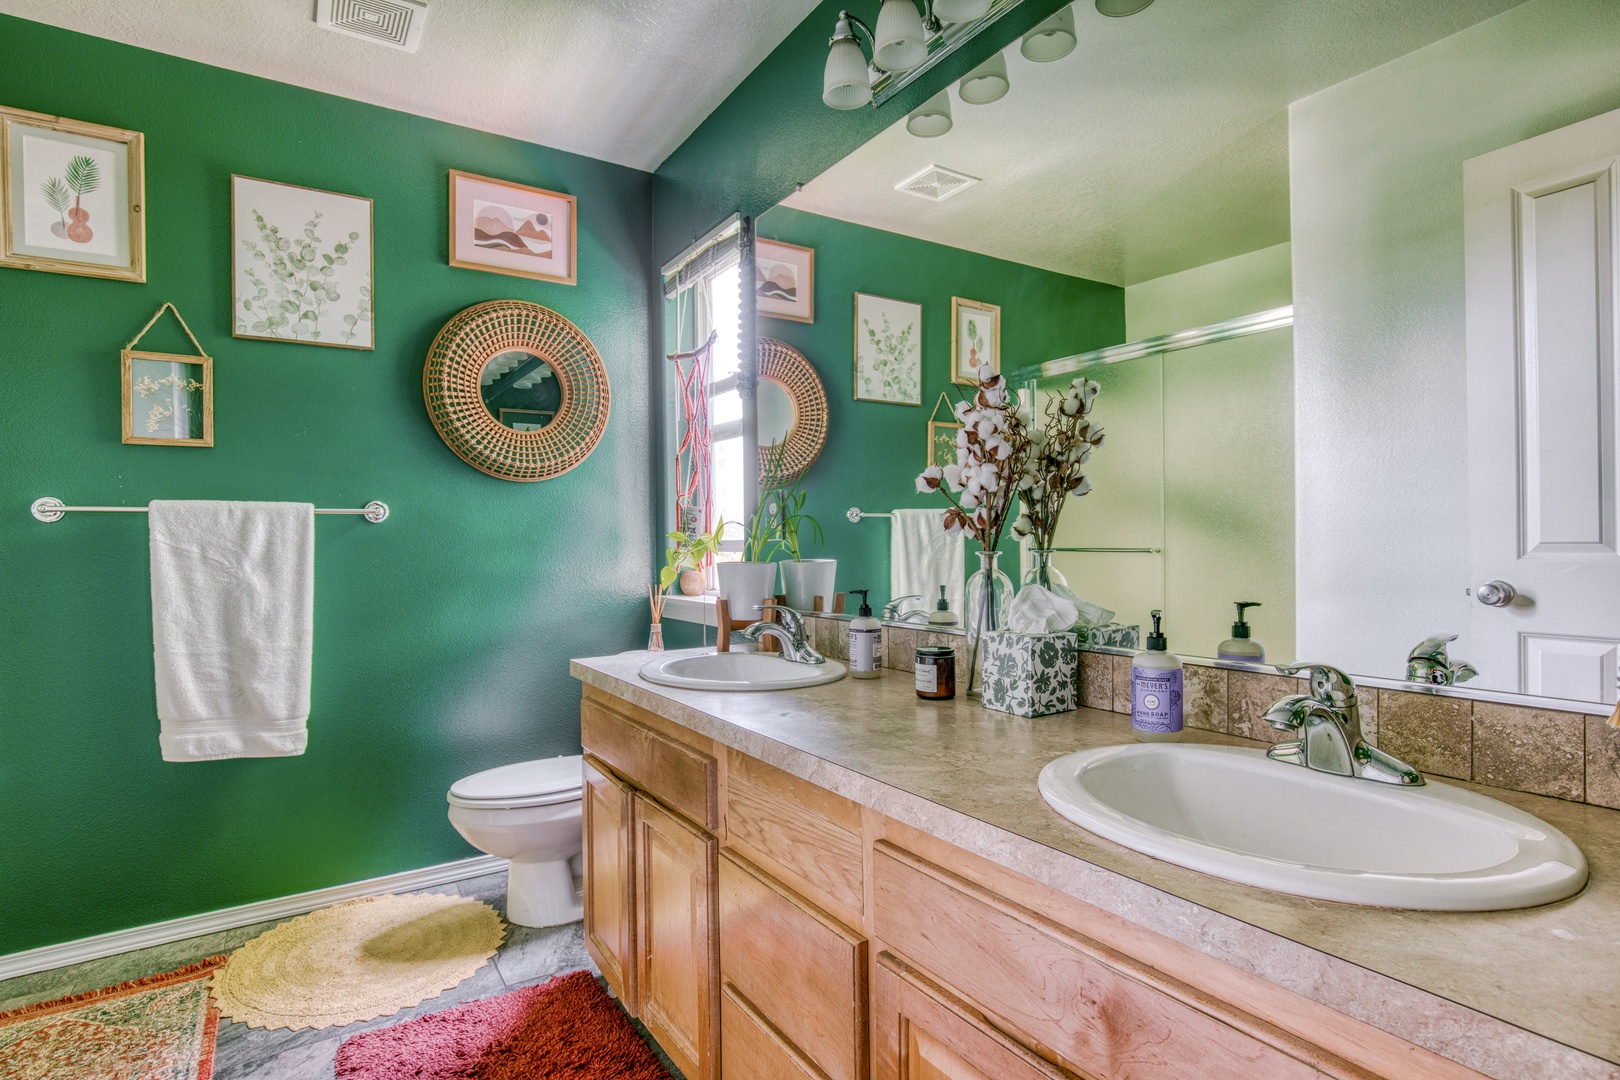 Clackamas Vacation Rentals, Duck Crossing - The ensuite boasts dual sinks and a large vanity